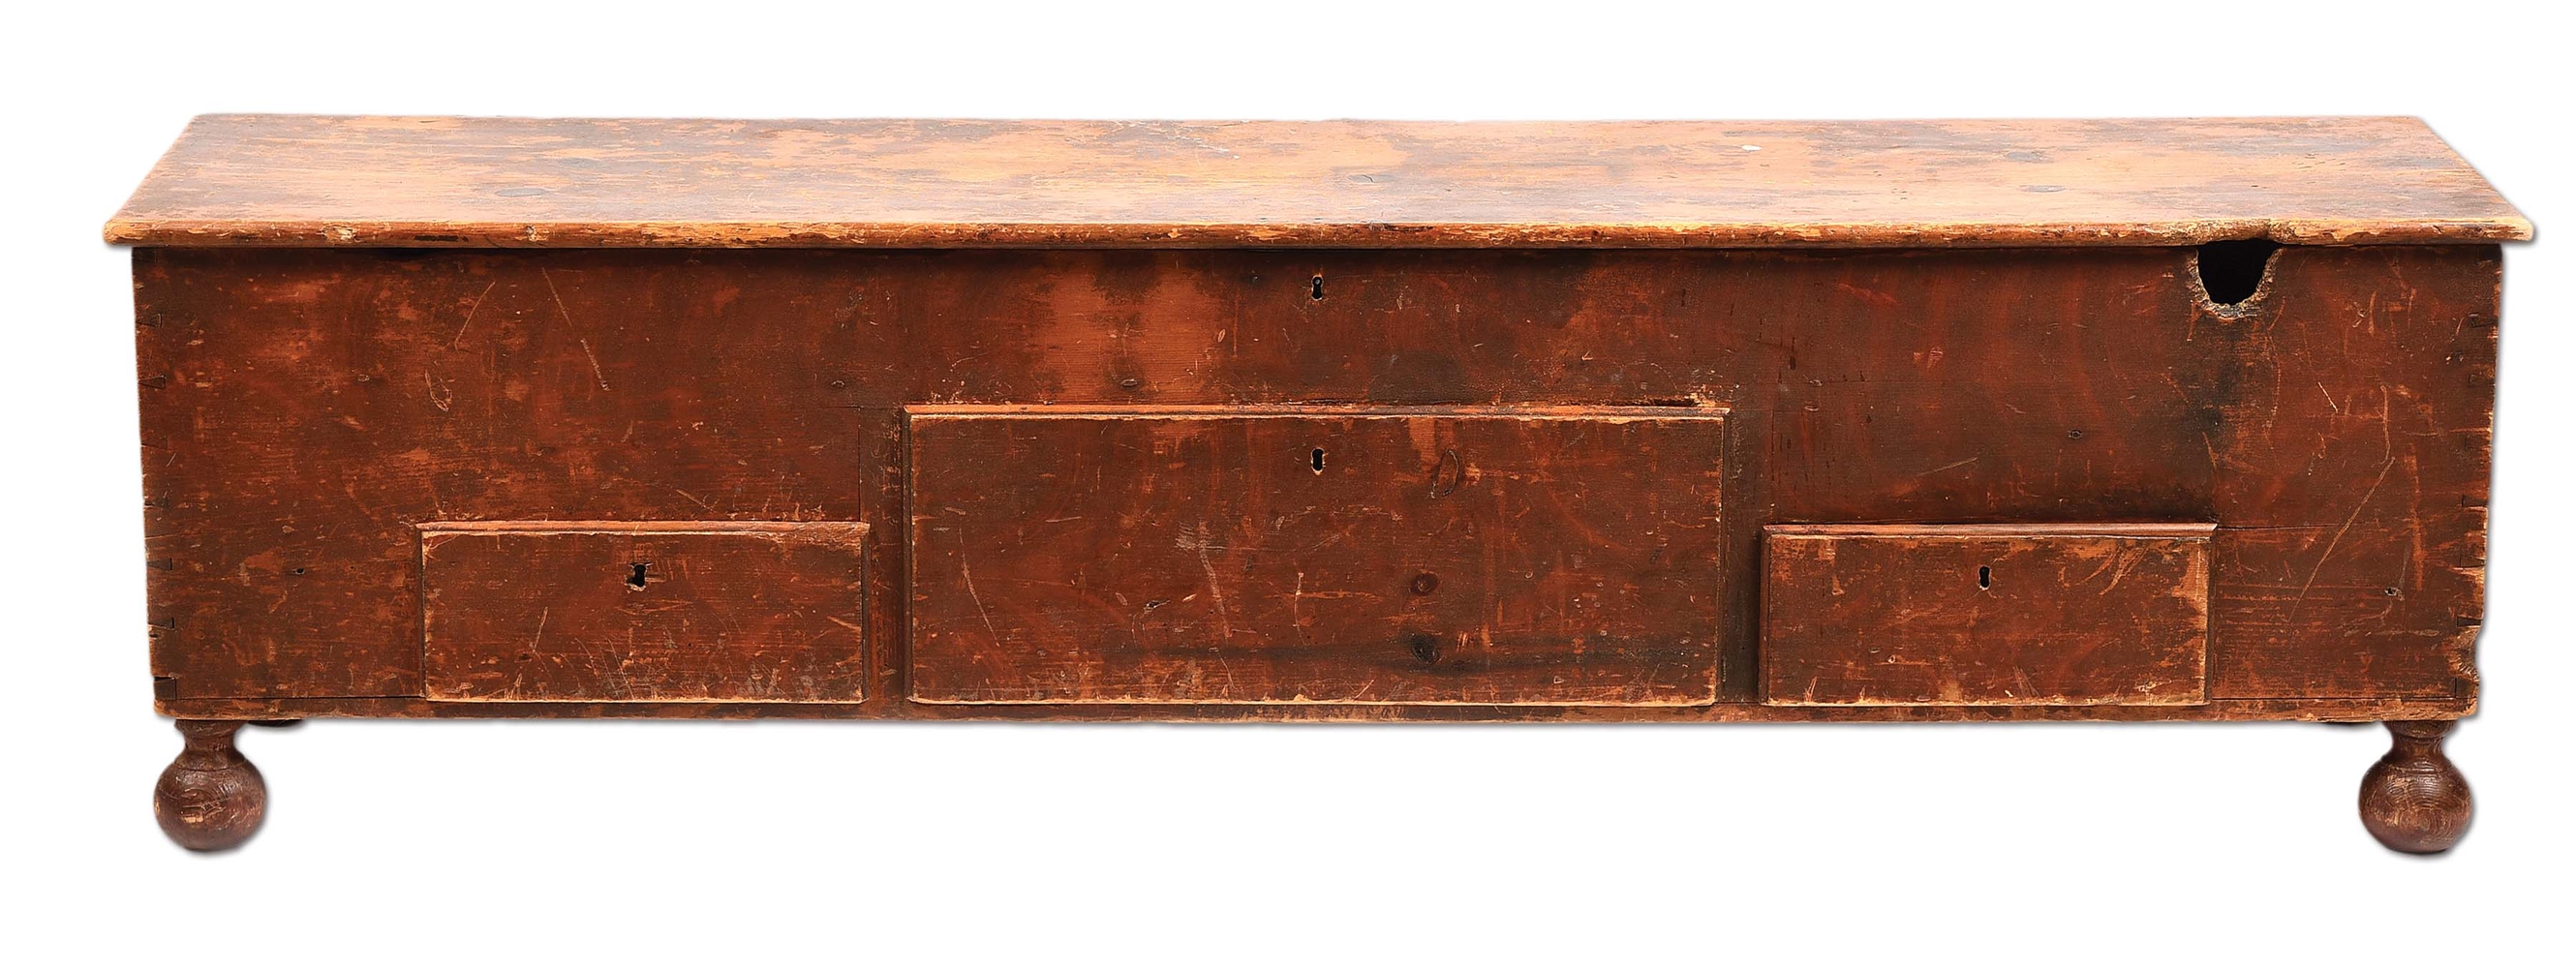 RARE PERIOD PAINT-DECORATED WEST VIRGINIA LONGRIFLE STORAGE CHEST, ONLY EXAMPLE EXTANT.